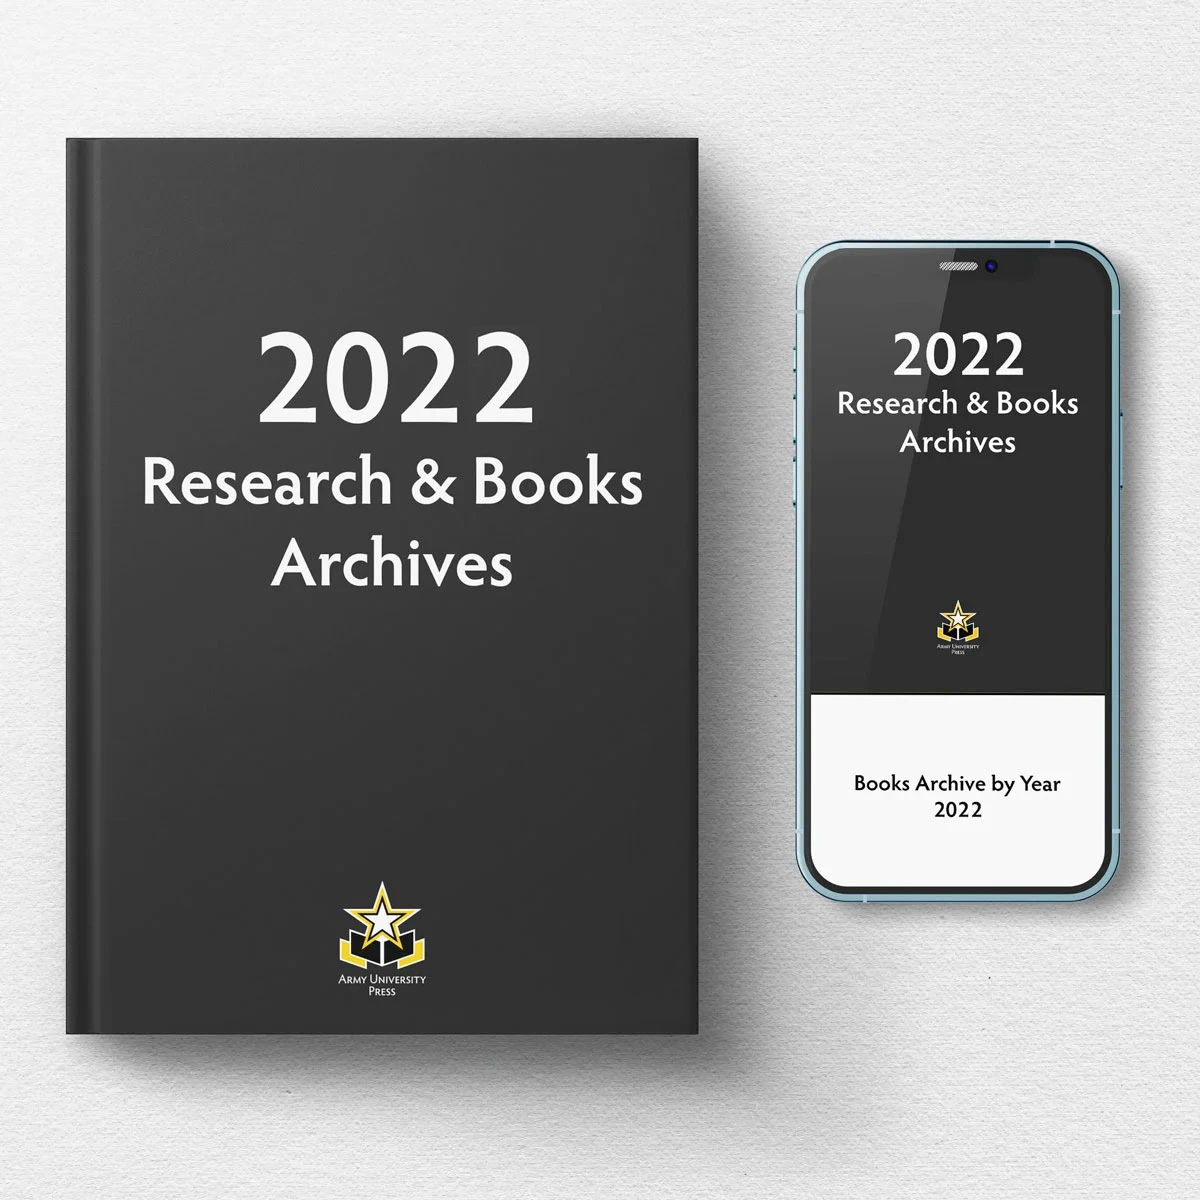 2022 Archives